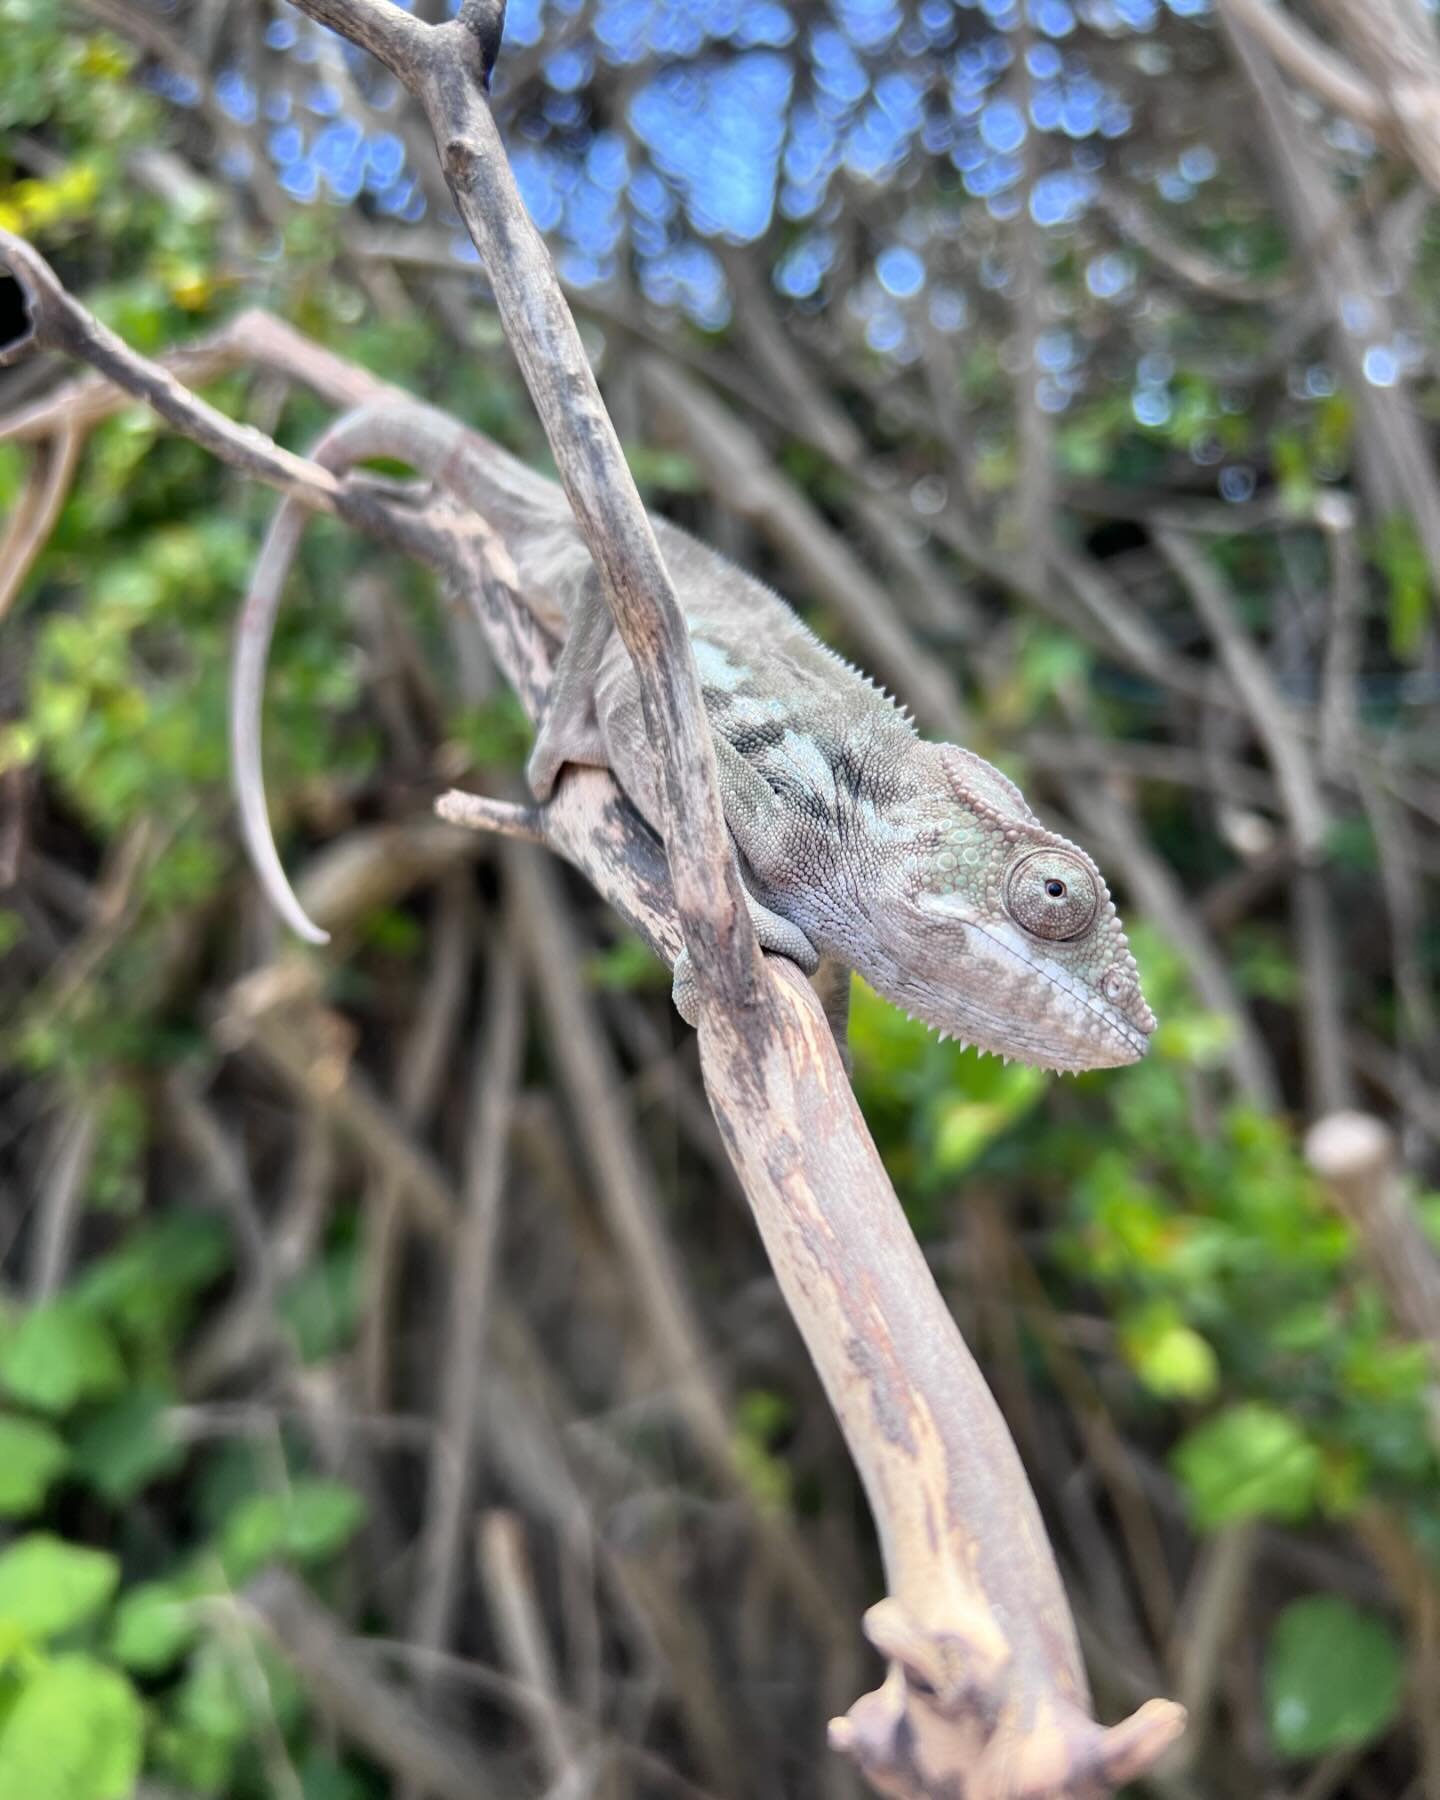 A female Yellow Body Blue Bar AMBILOBE that is currently on our website site 👉 Chameleonbros.com

#chameleon #pantherchameleon #ambilobe